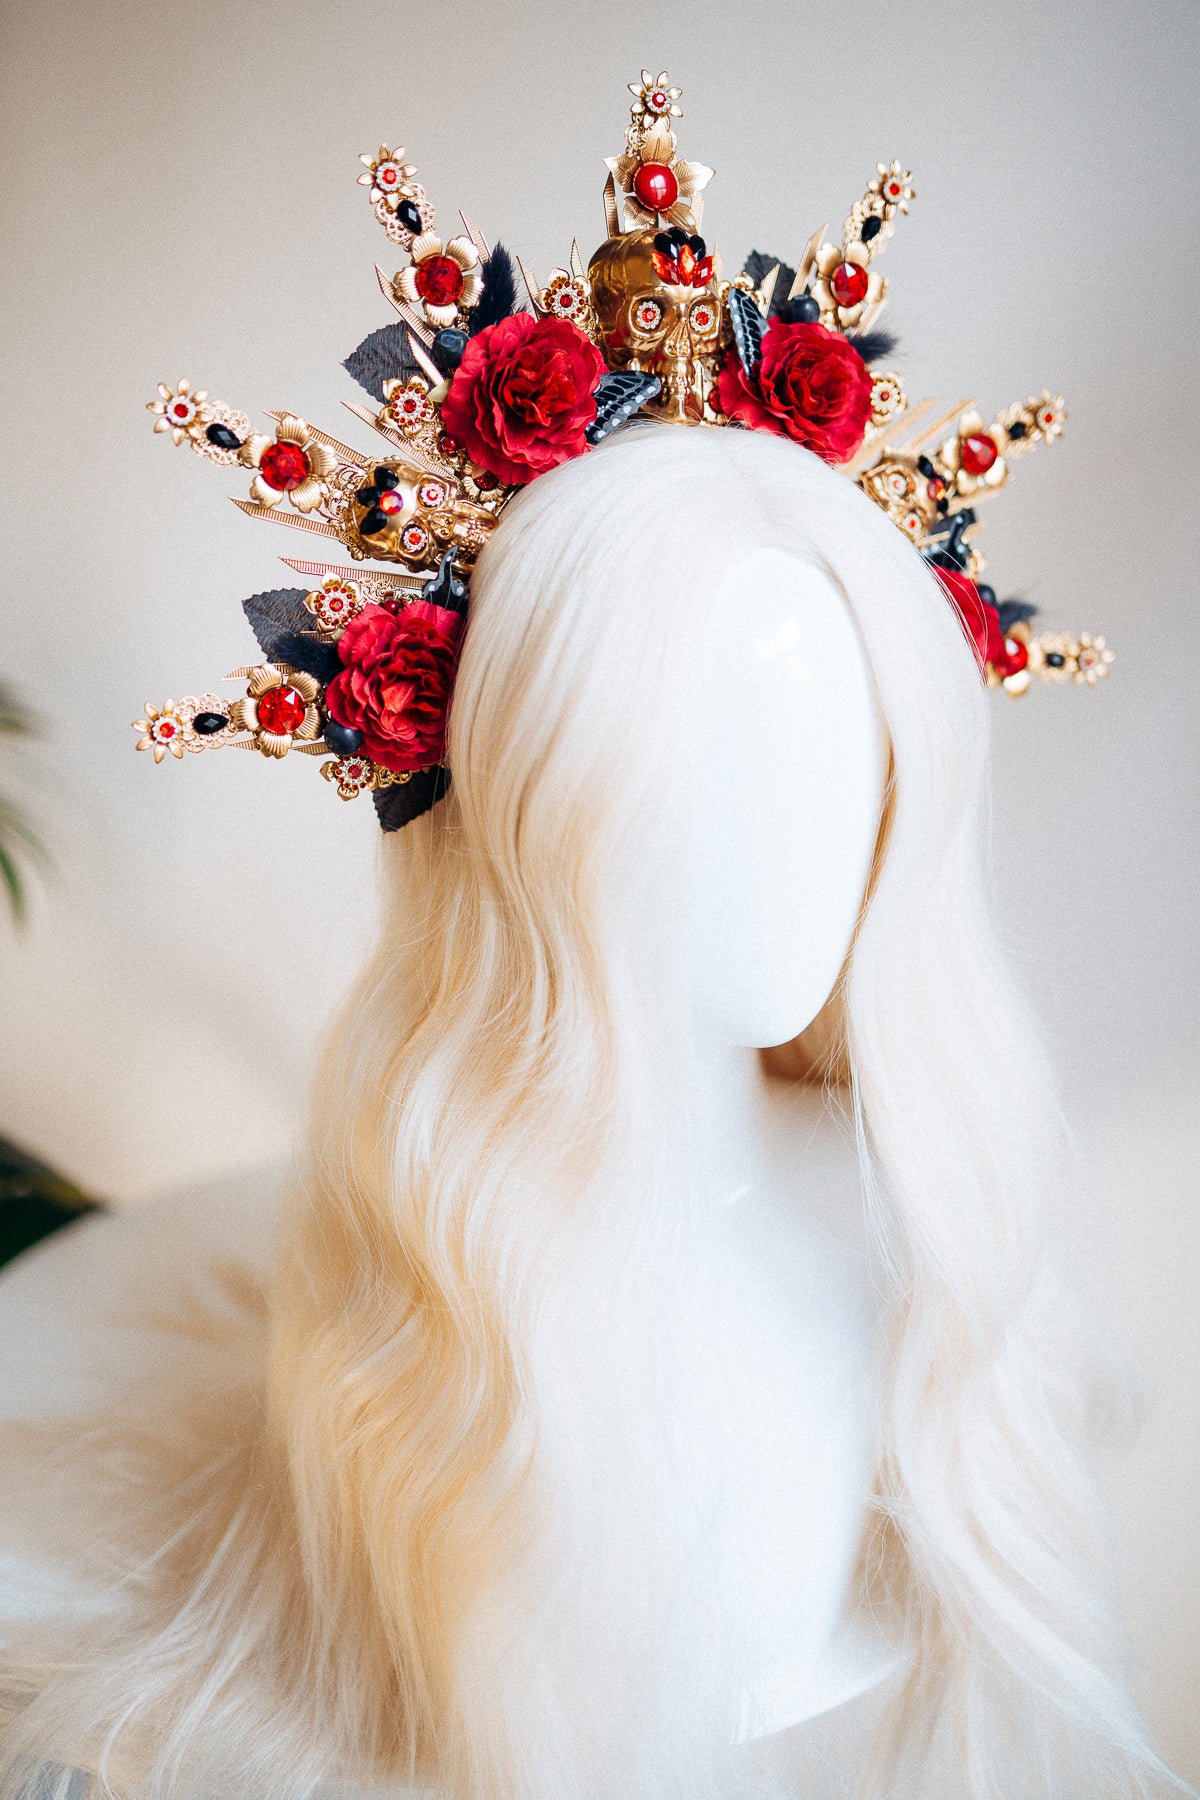 Load image into Gallery viewer, Hallowen Sugar Skull Crown Red
